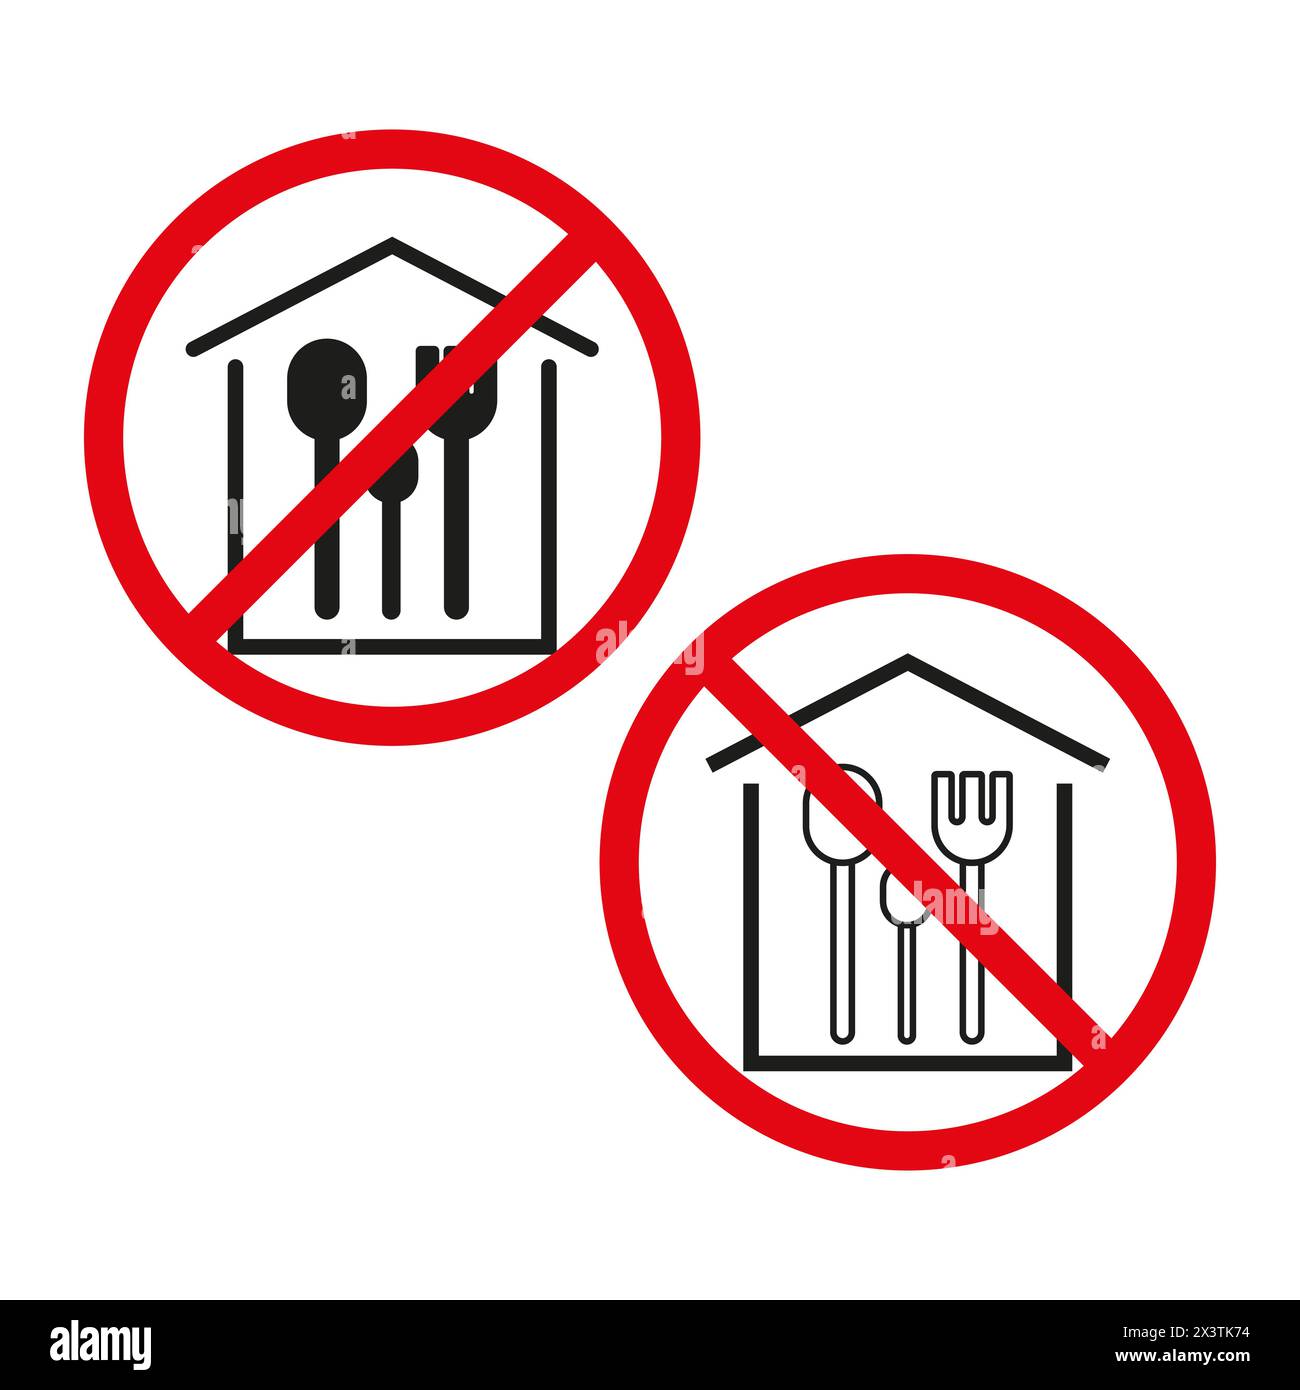 No eating or drinking allowed signs. Food and beverage prohibition symbols. Vector illustration. EPS 10. Stock Vector